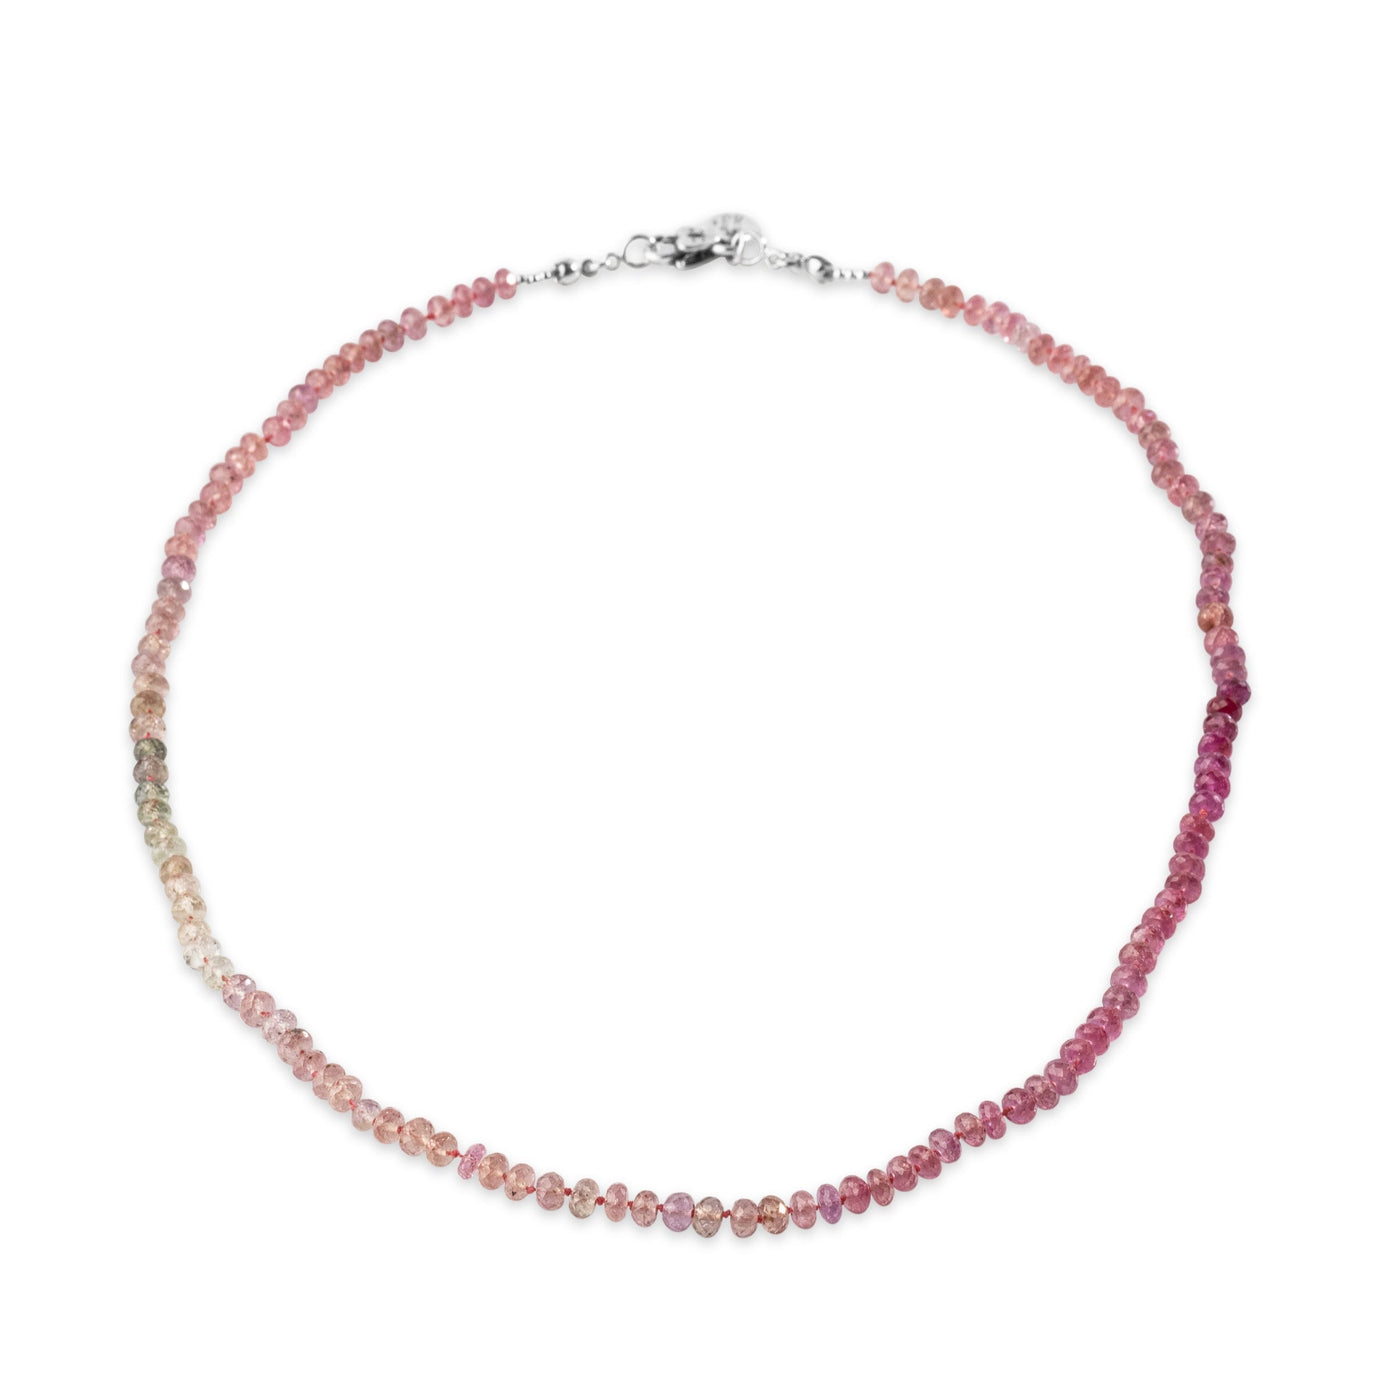 1OAK Empowered Pink Sapphire Knotted Silk Signature Necklace